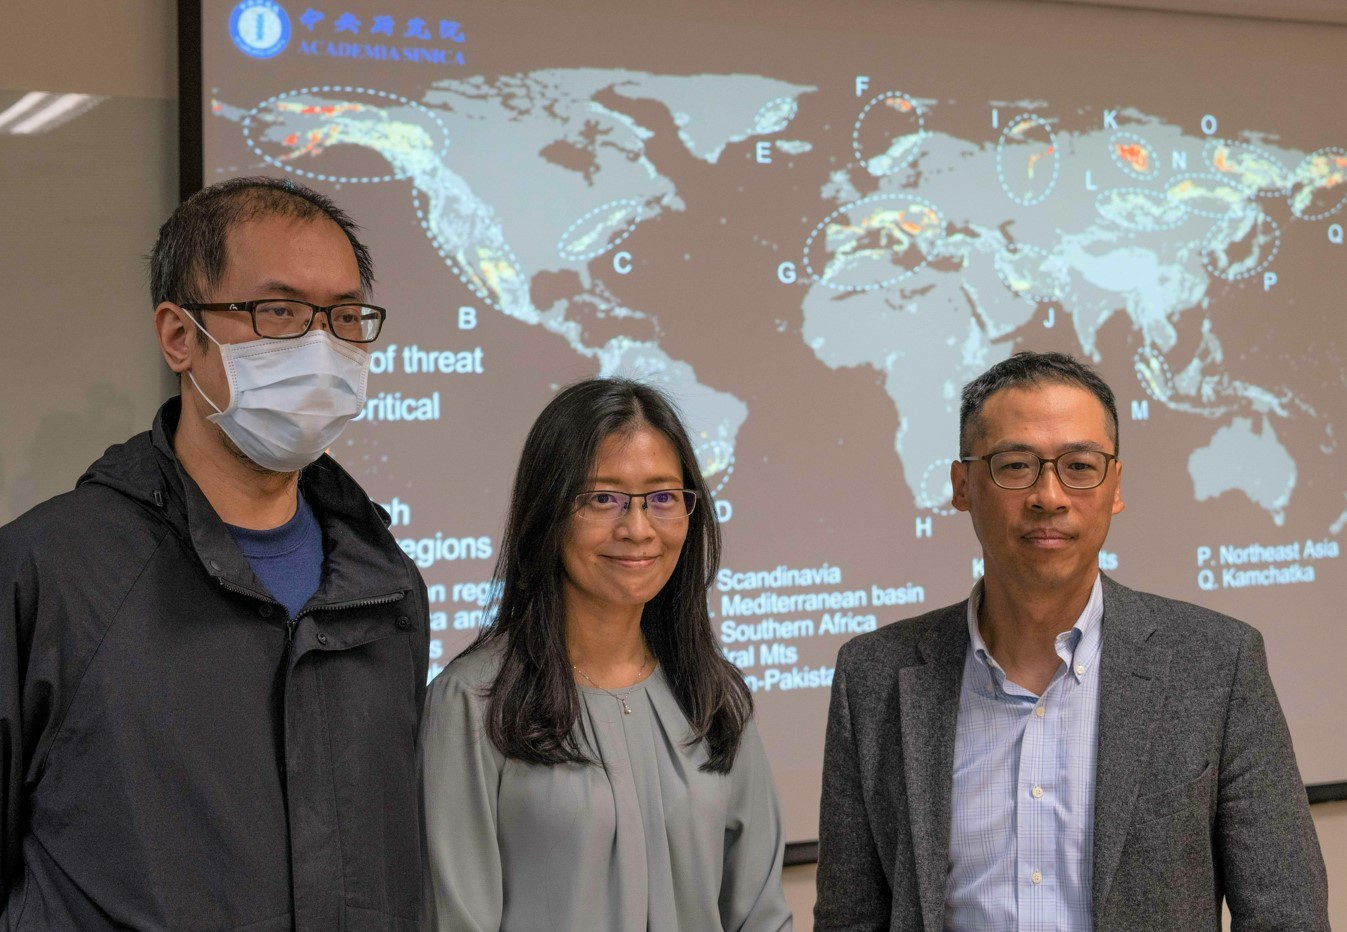 Discovery: Severe Warming Found in 17 Mountain Regions Worldwide. Interdisciplinary Research from Academia Sinica Published in the Journal Nature